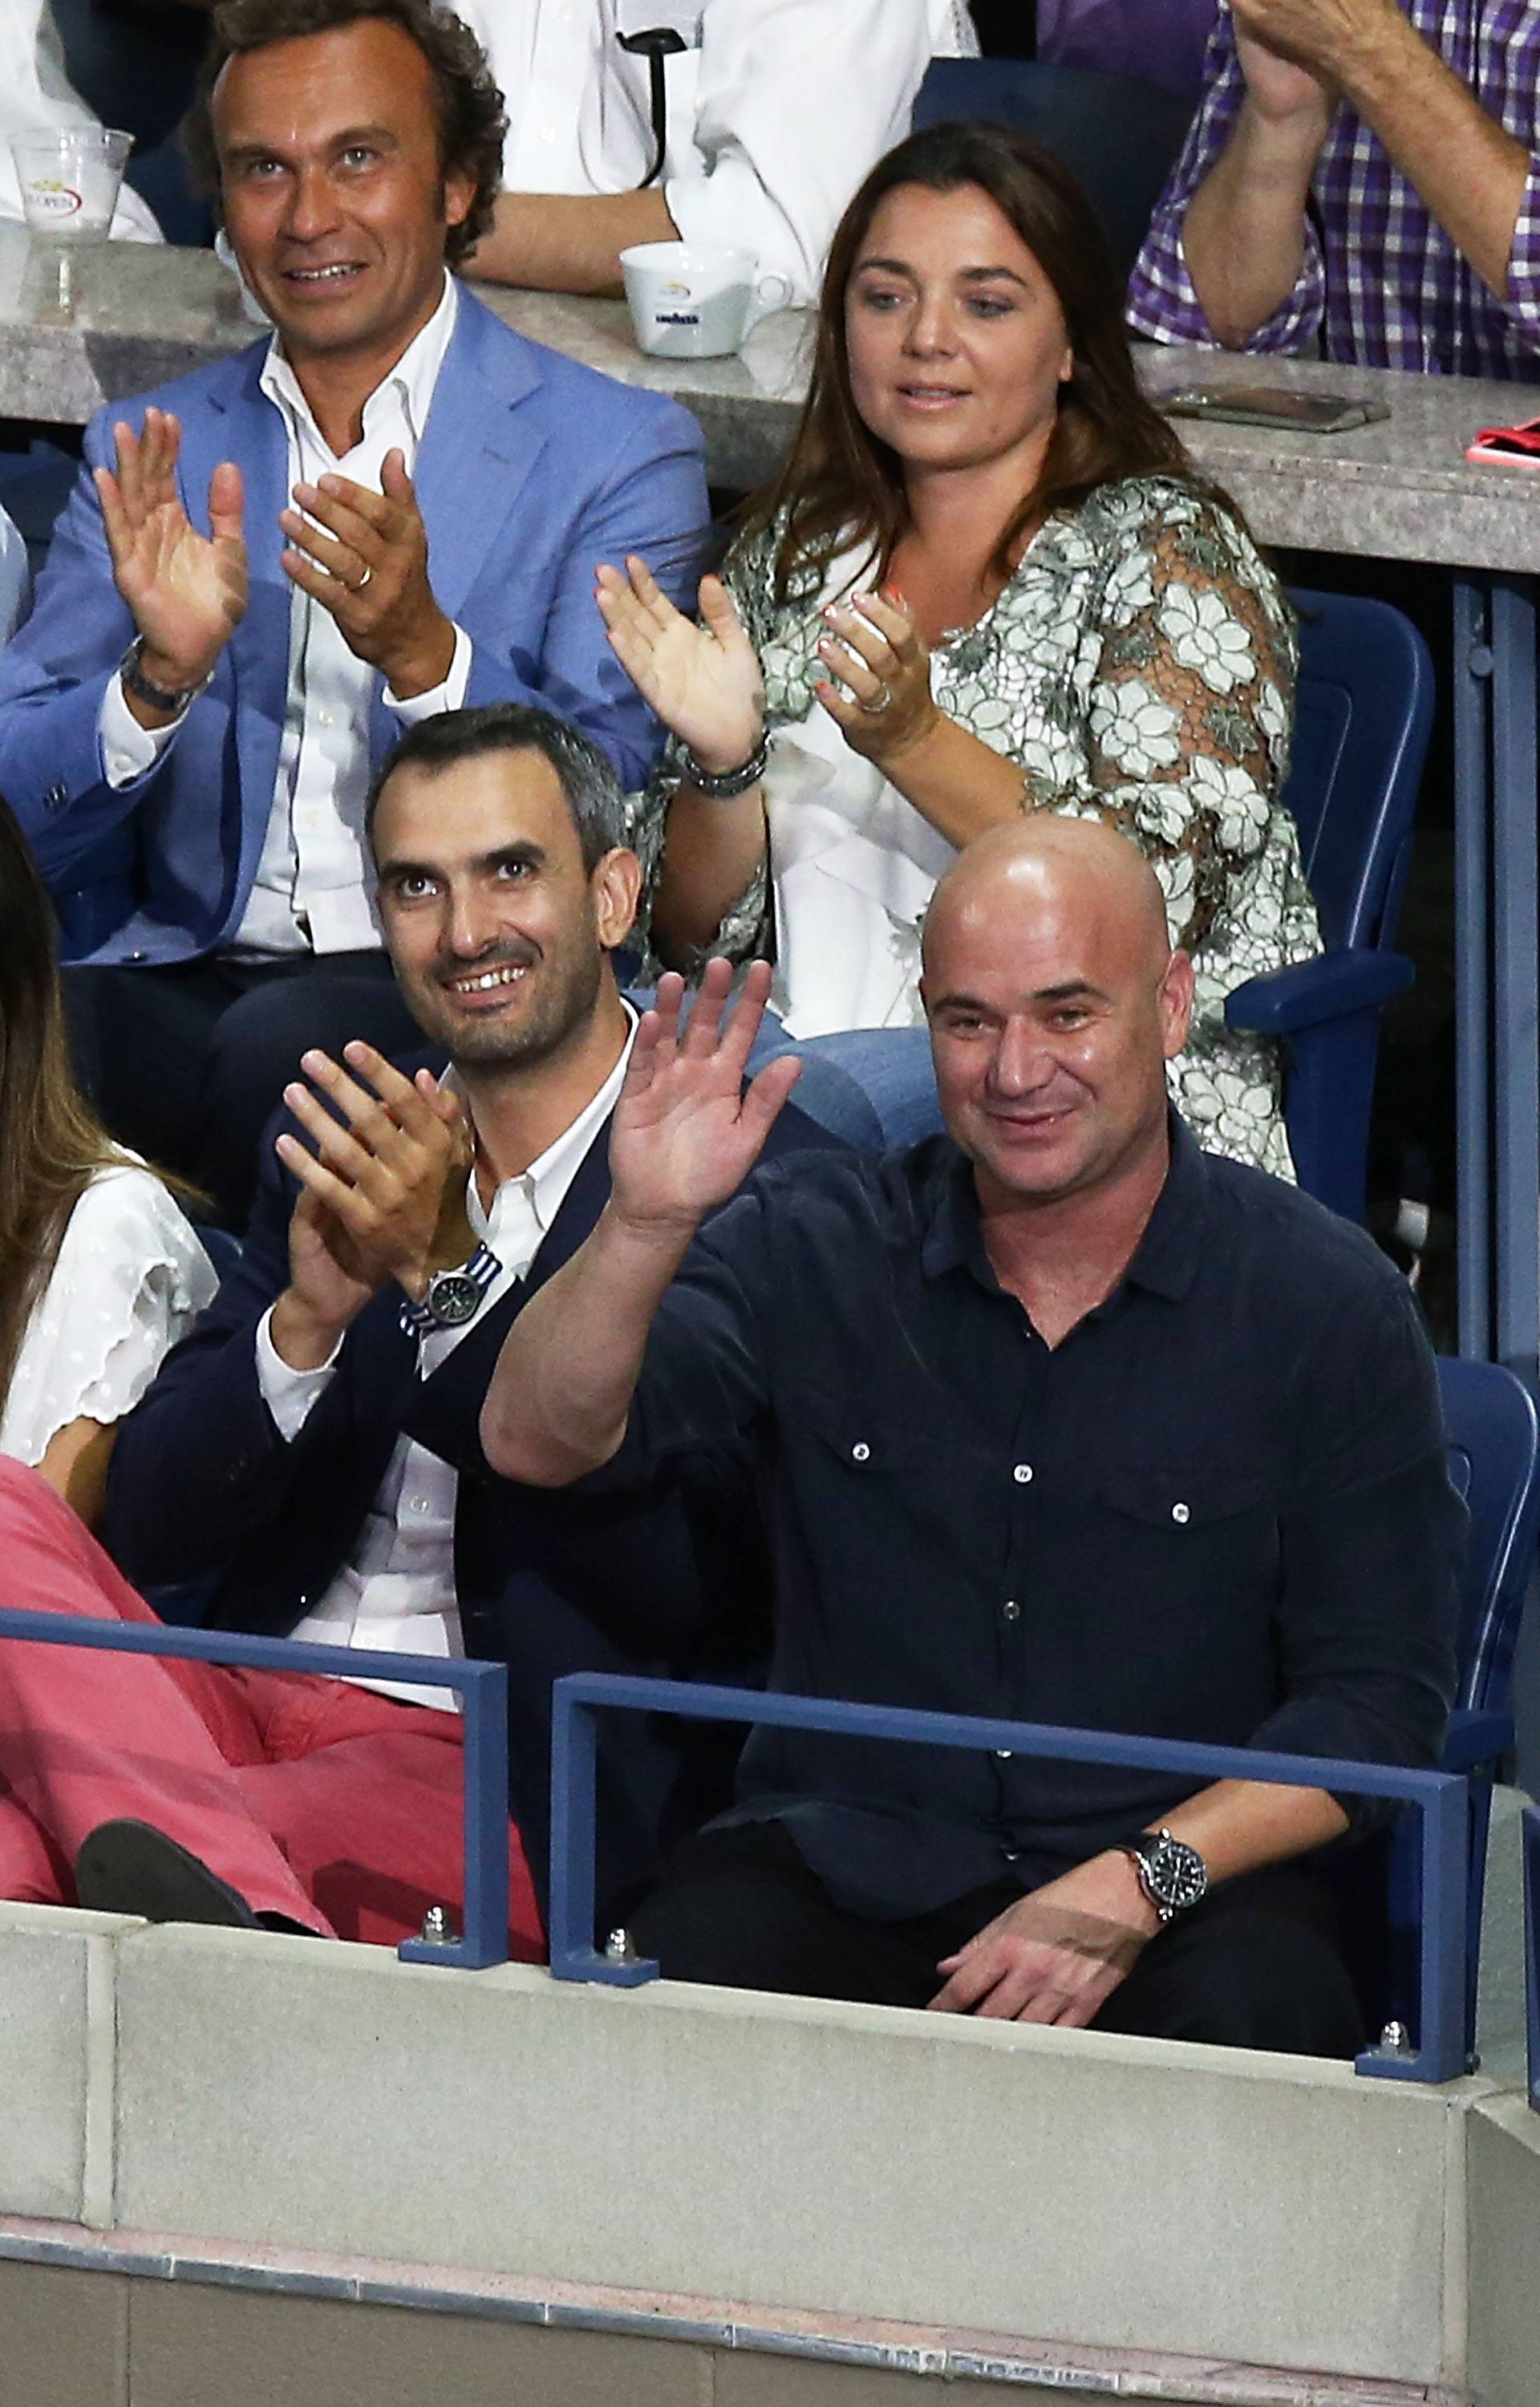 LAVAZZA - OFFICIAL COFFEE OF THE US OPEN - PARTNERS WITH INTERNATIONAL TENNIS LEGEND, ANDRE AGASSI